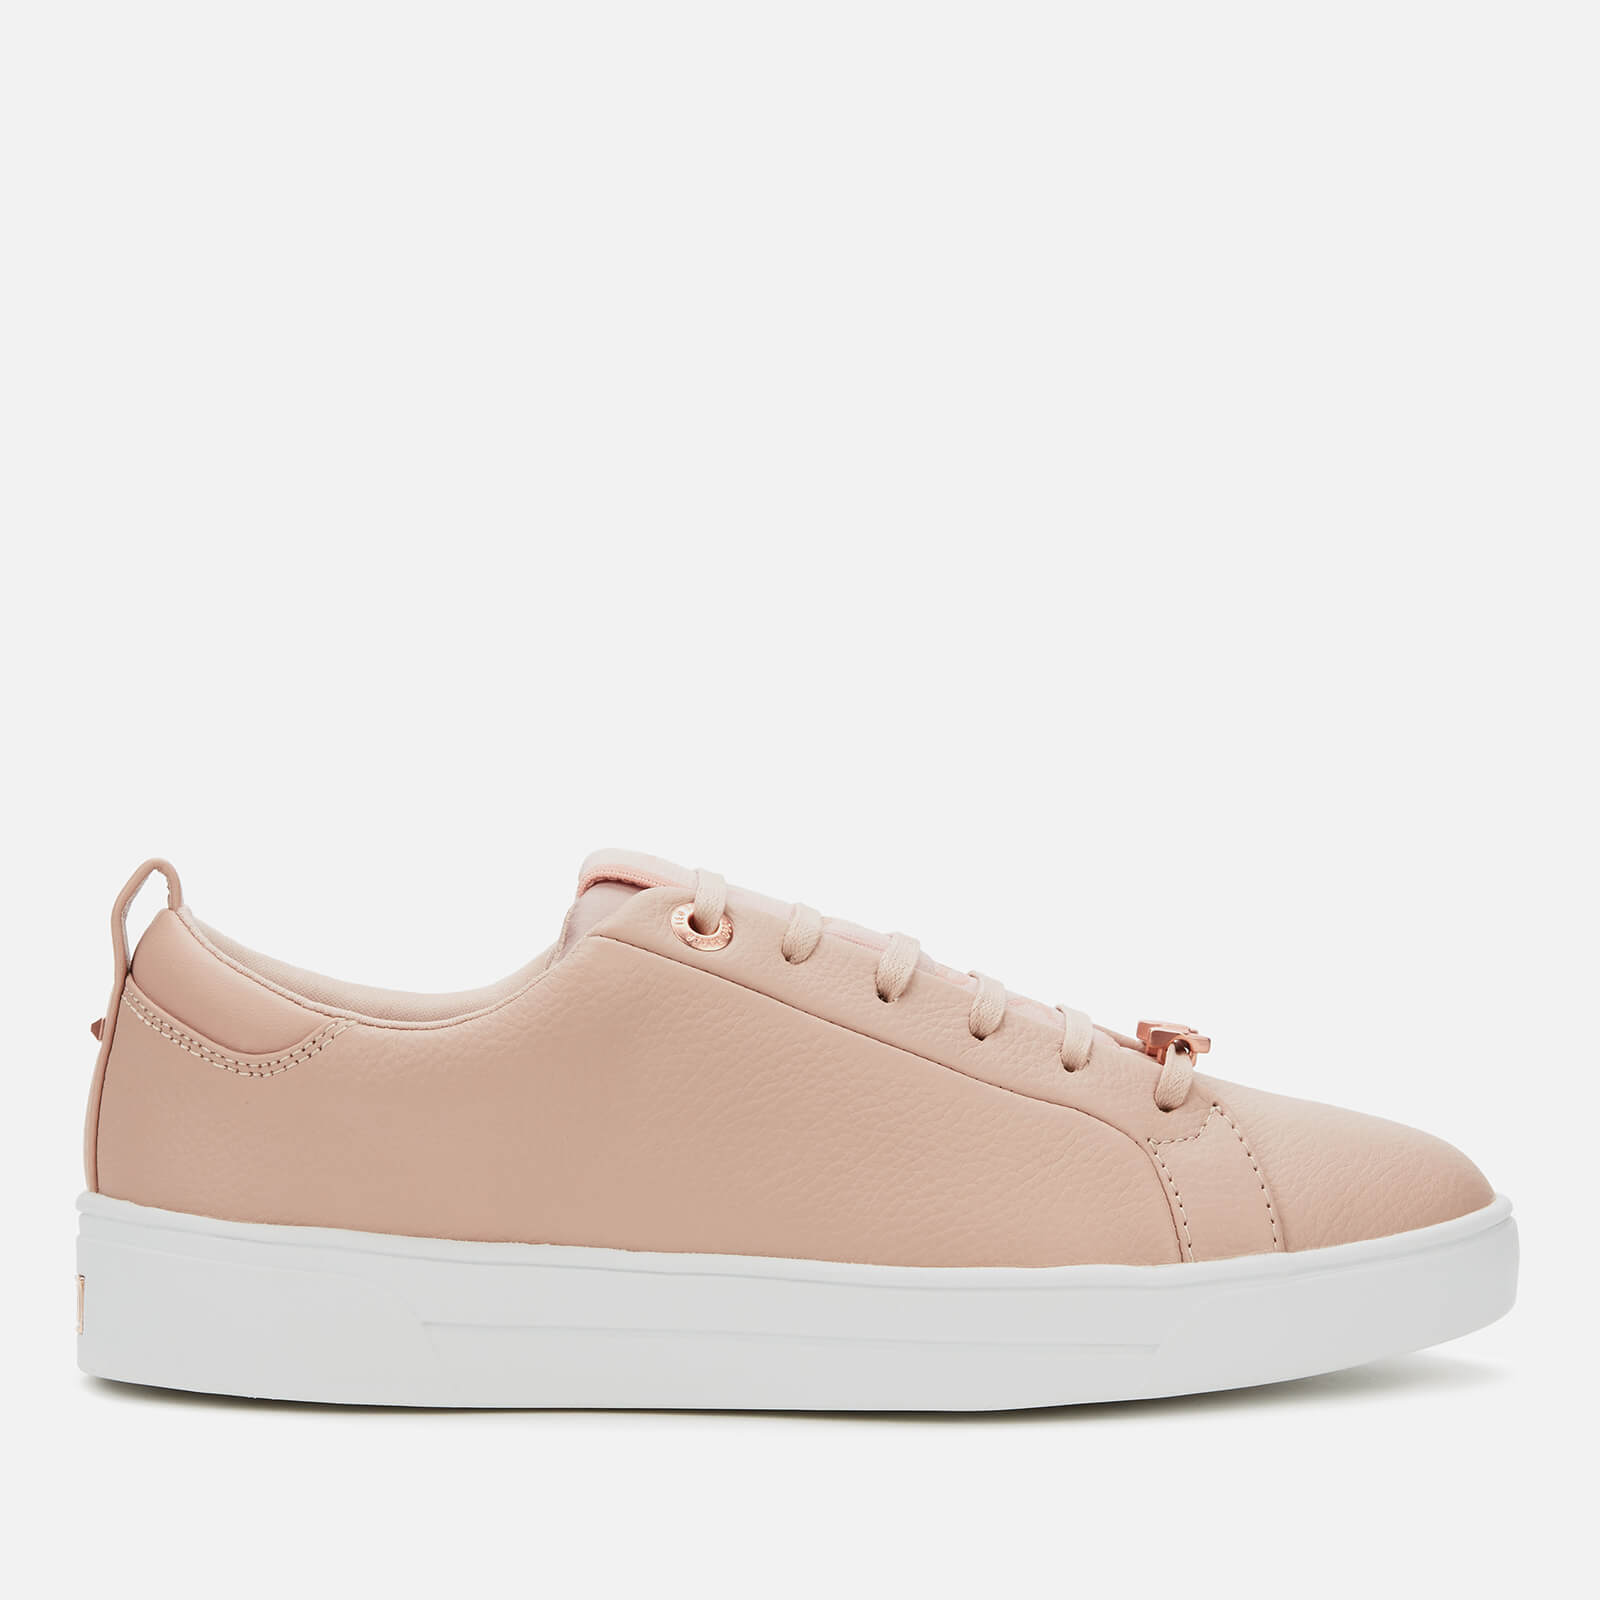 Tedah Branded Leather Trainers - Pink 